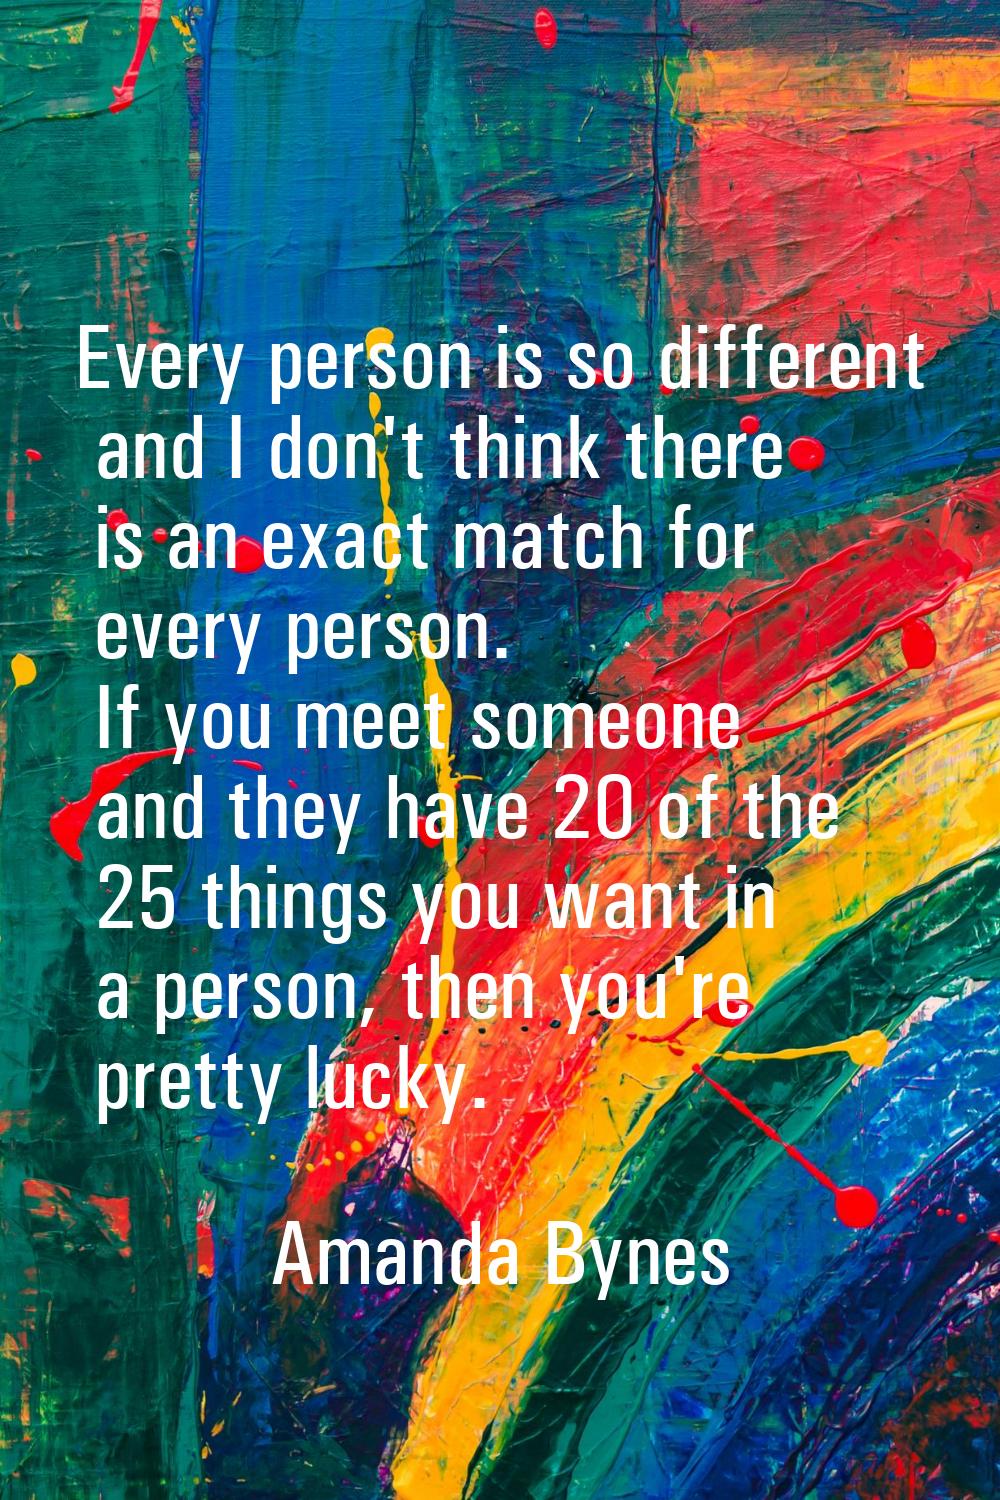 Every person is so different and I don't think there is an exact match for every person. If you mee